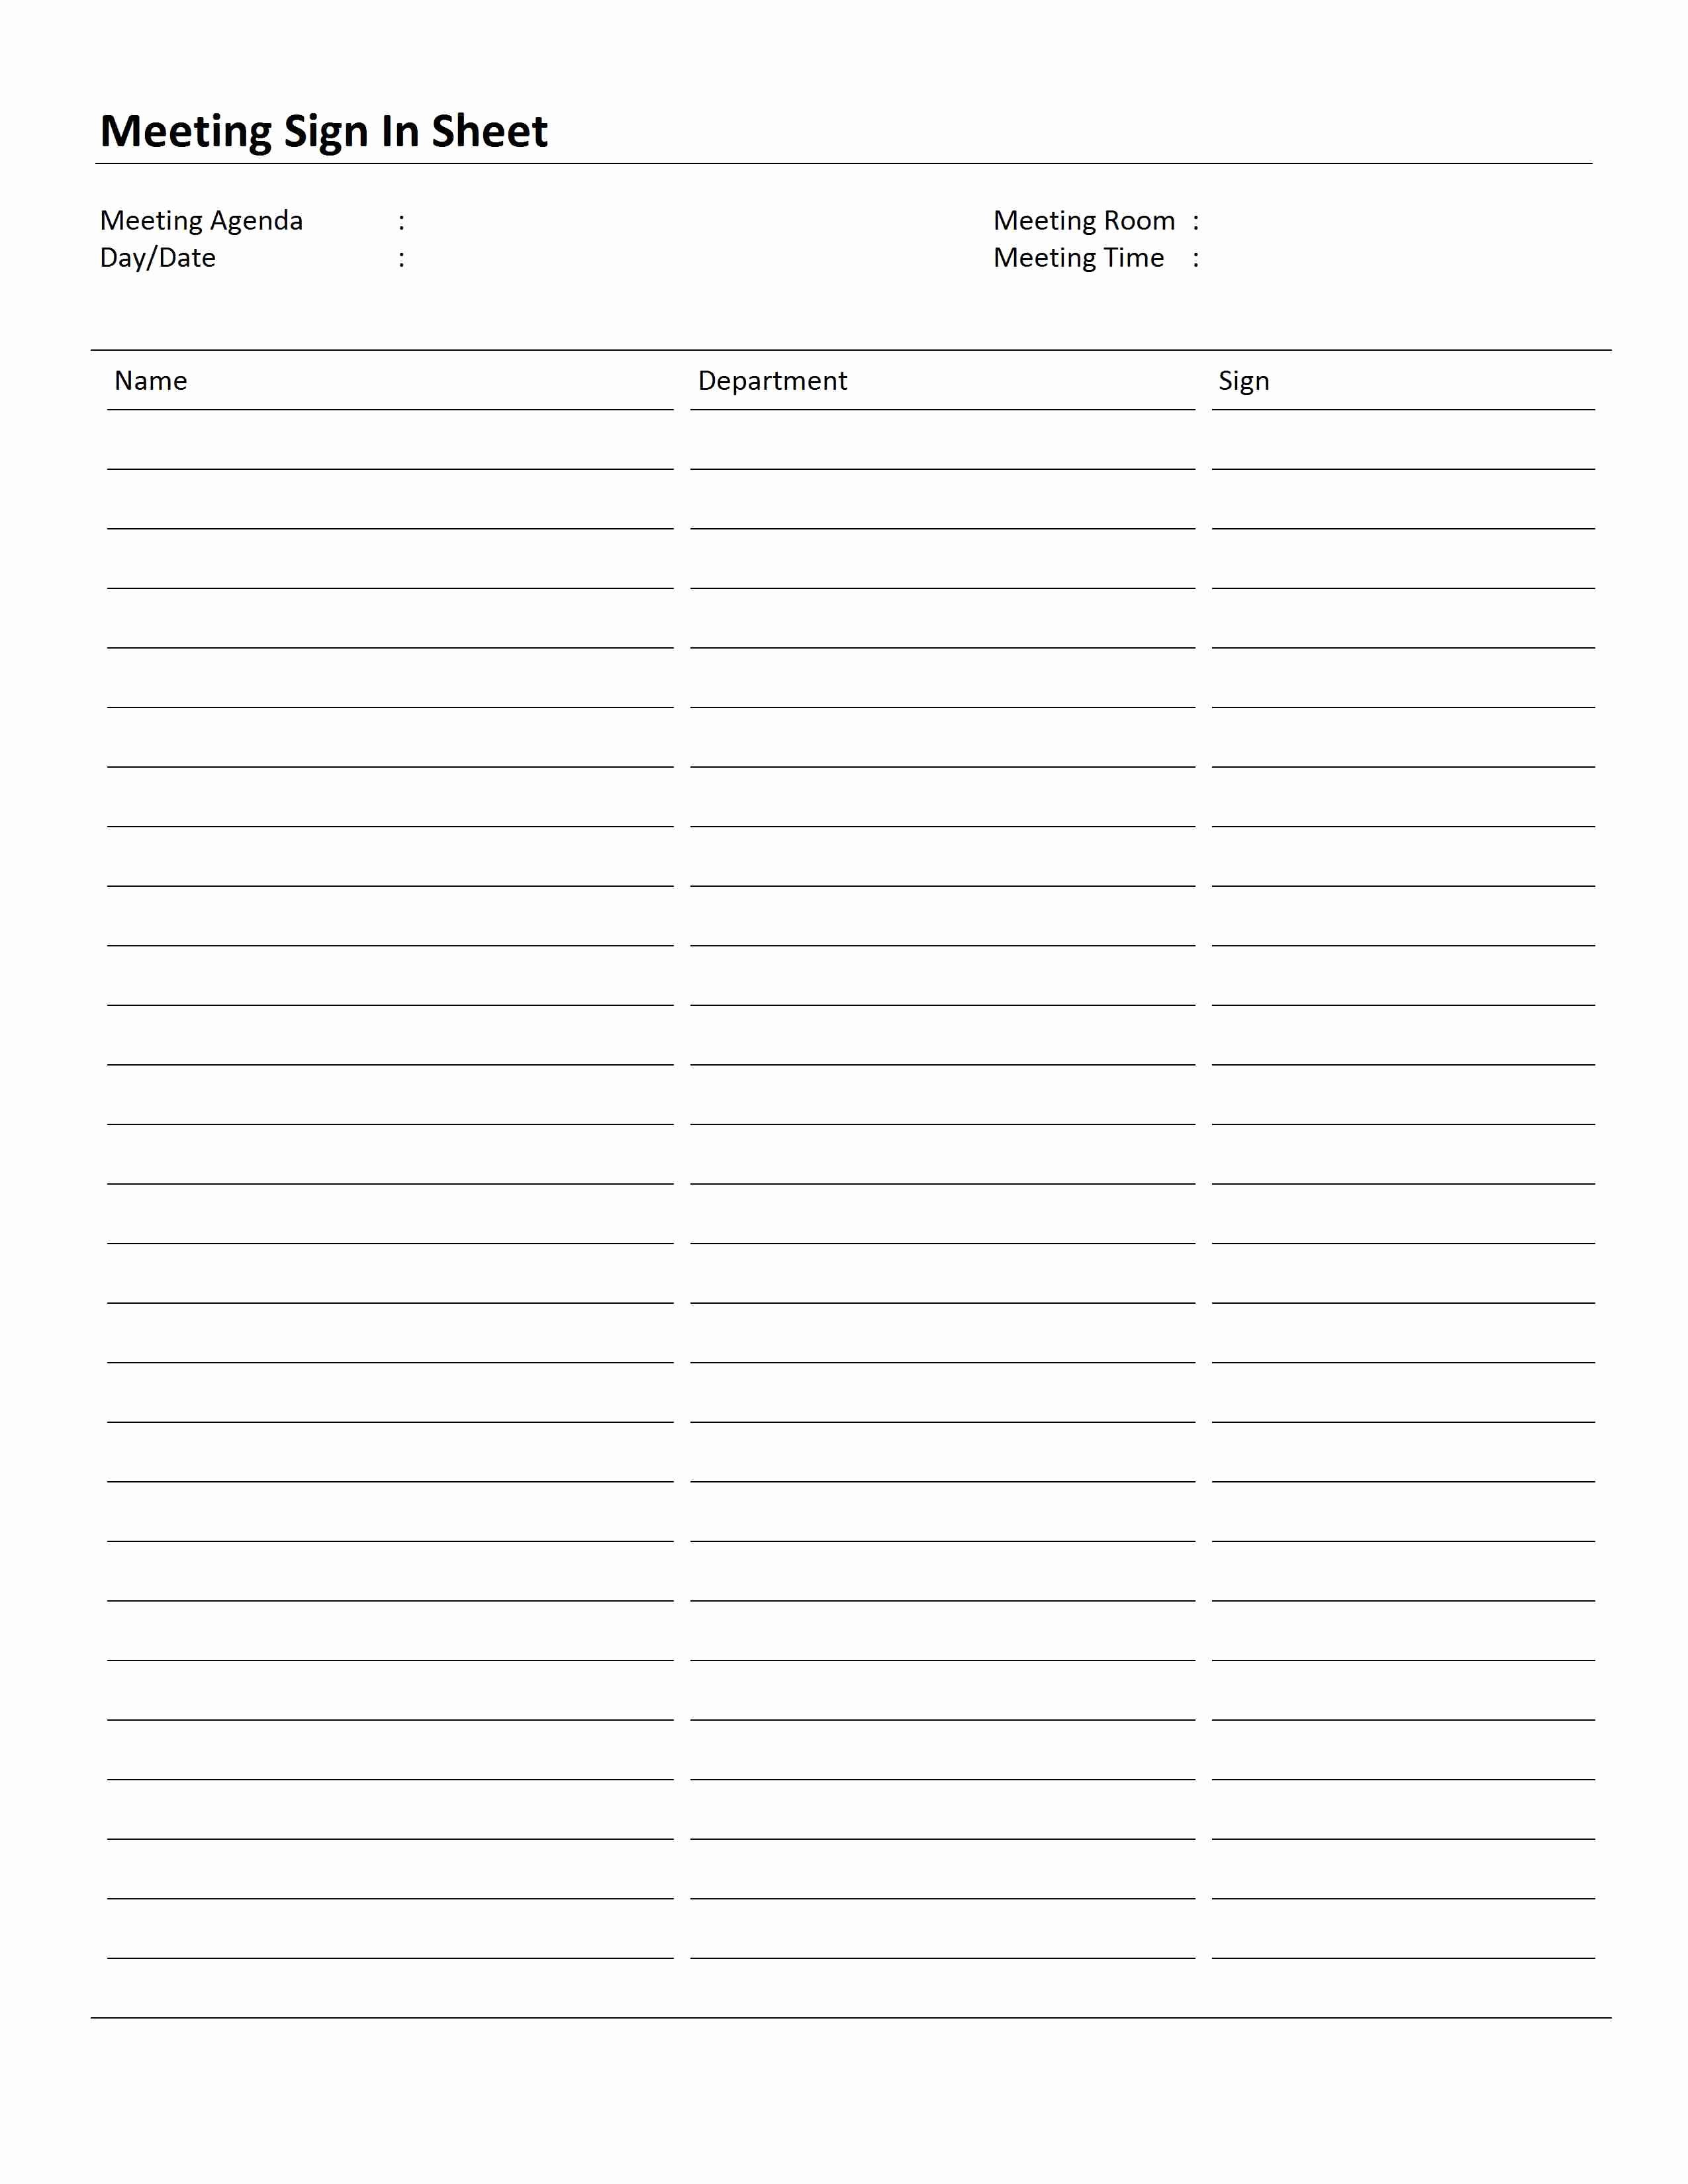 Meeting Sign In Sheet Template Fresh Meeting Sign In Sheet